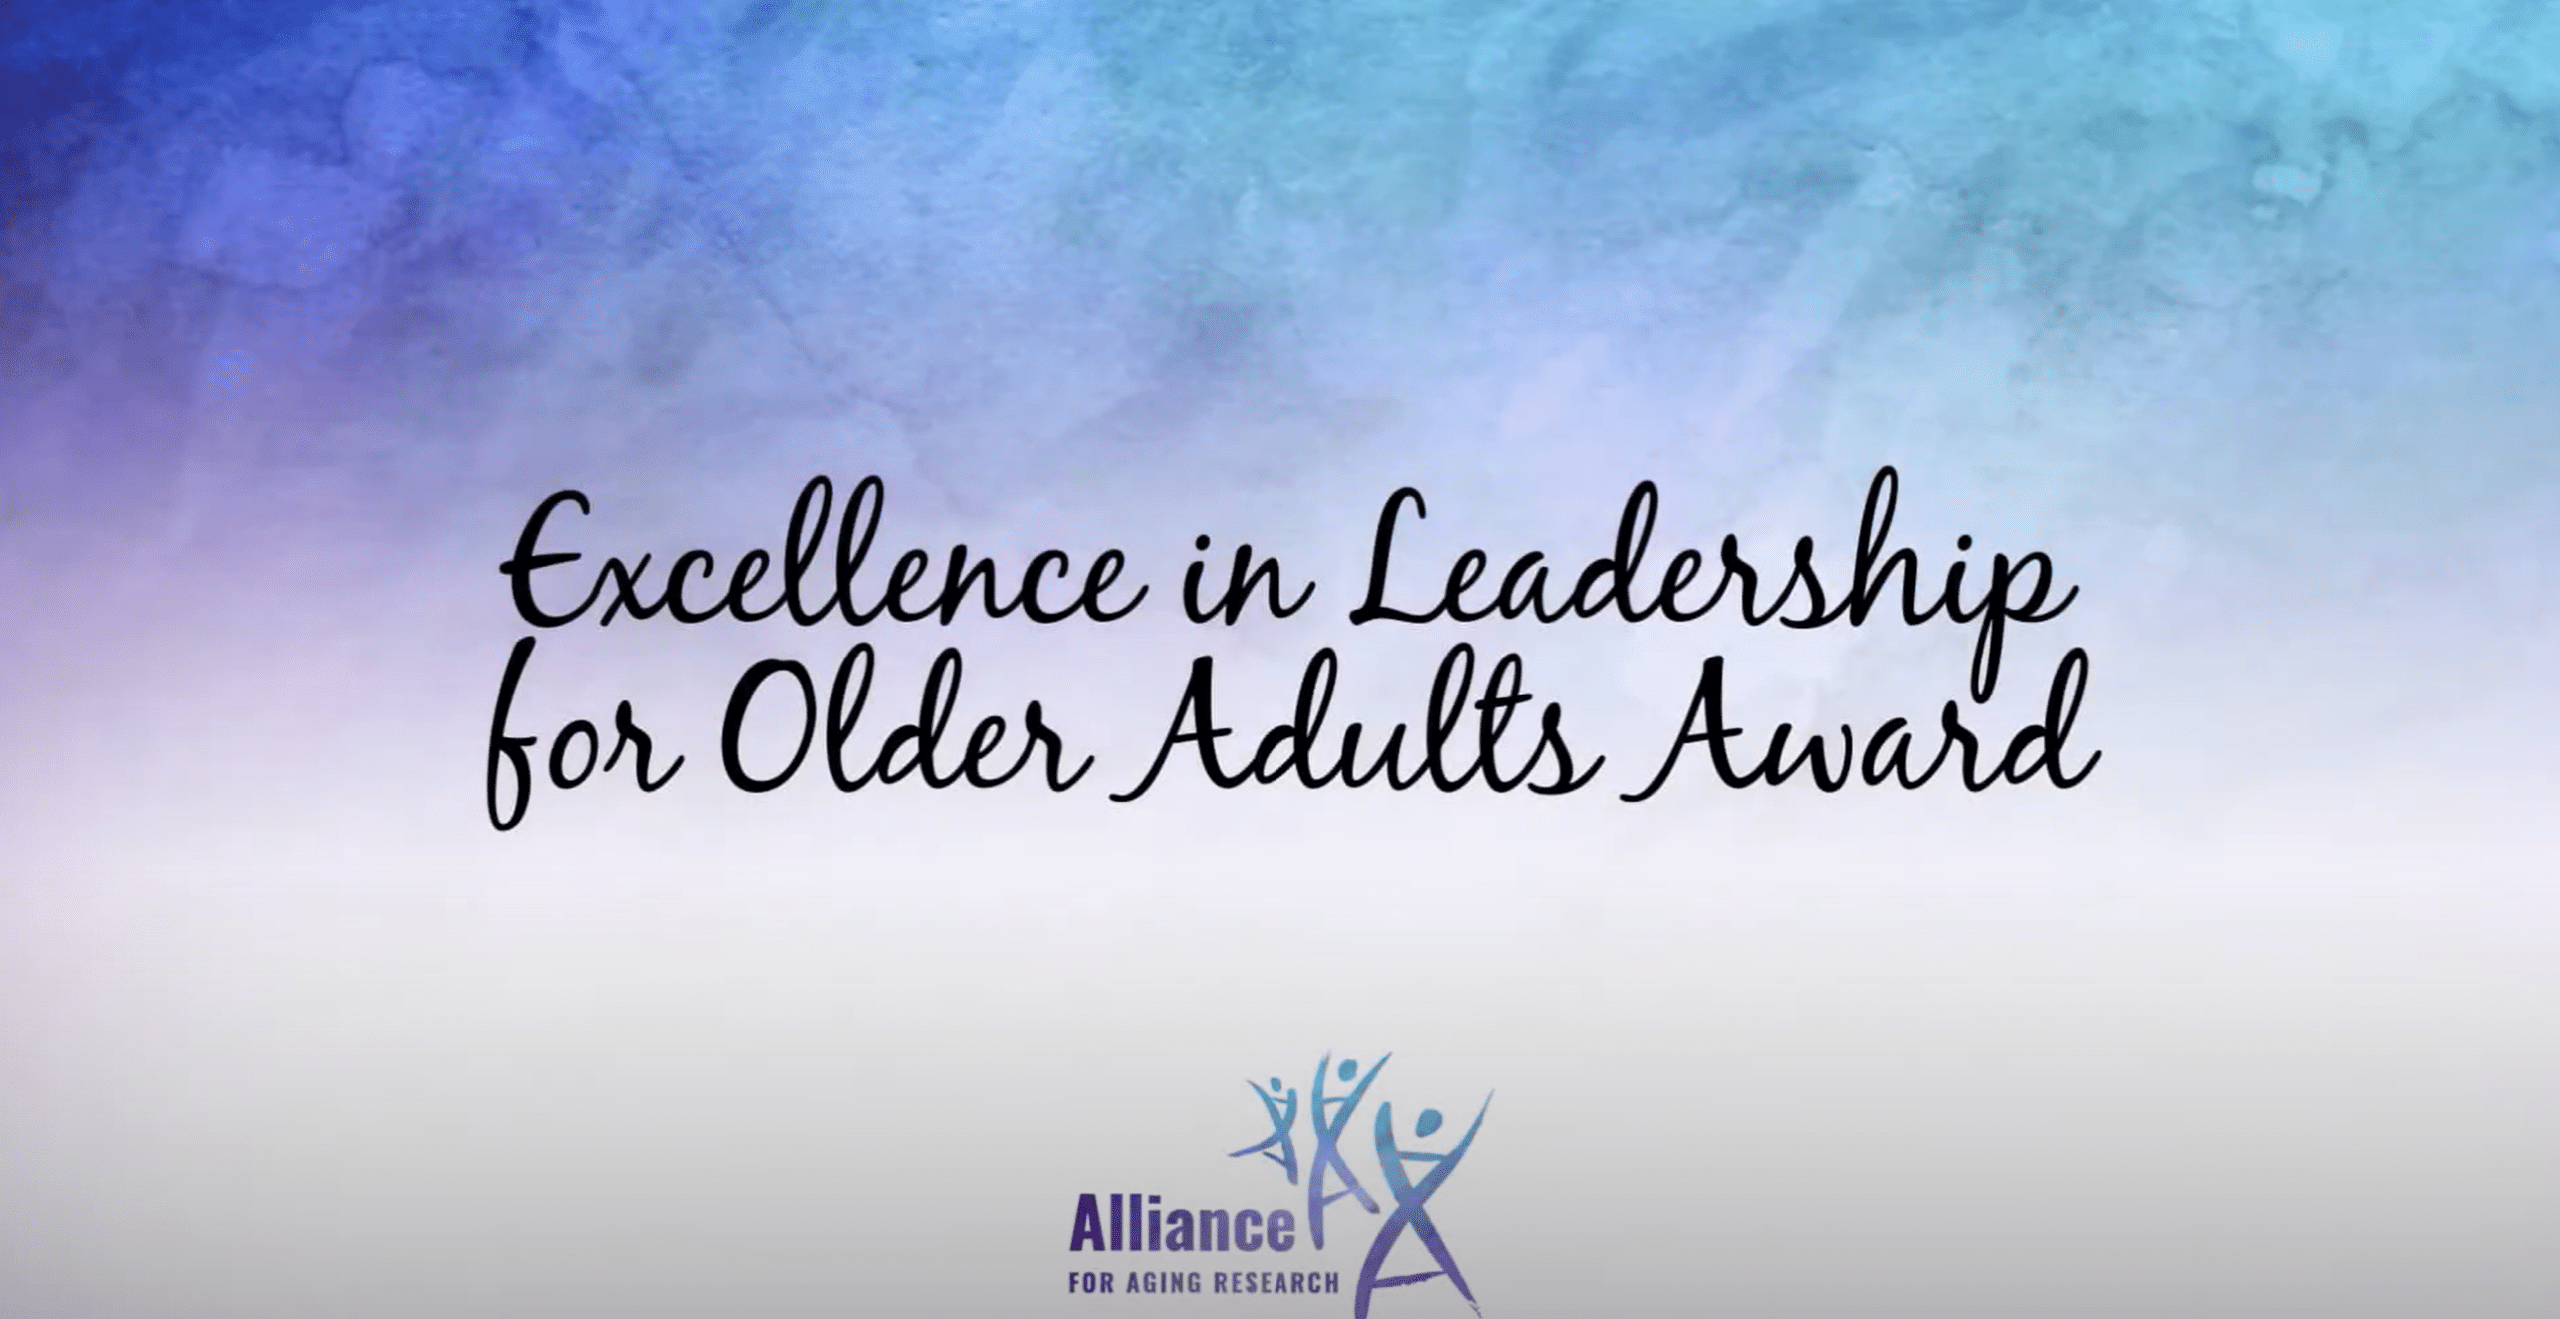 Title slide for Excellence in Leadership for Older Adults Award for 2020 Alliance event.